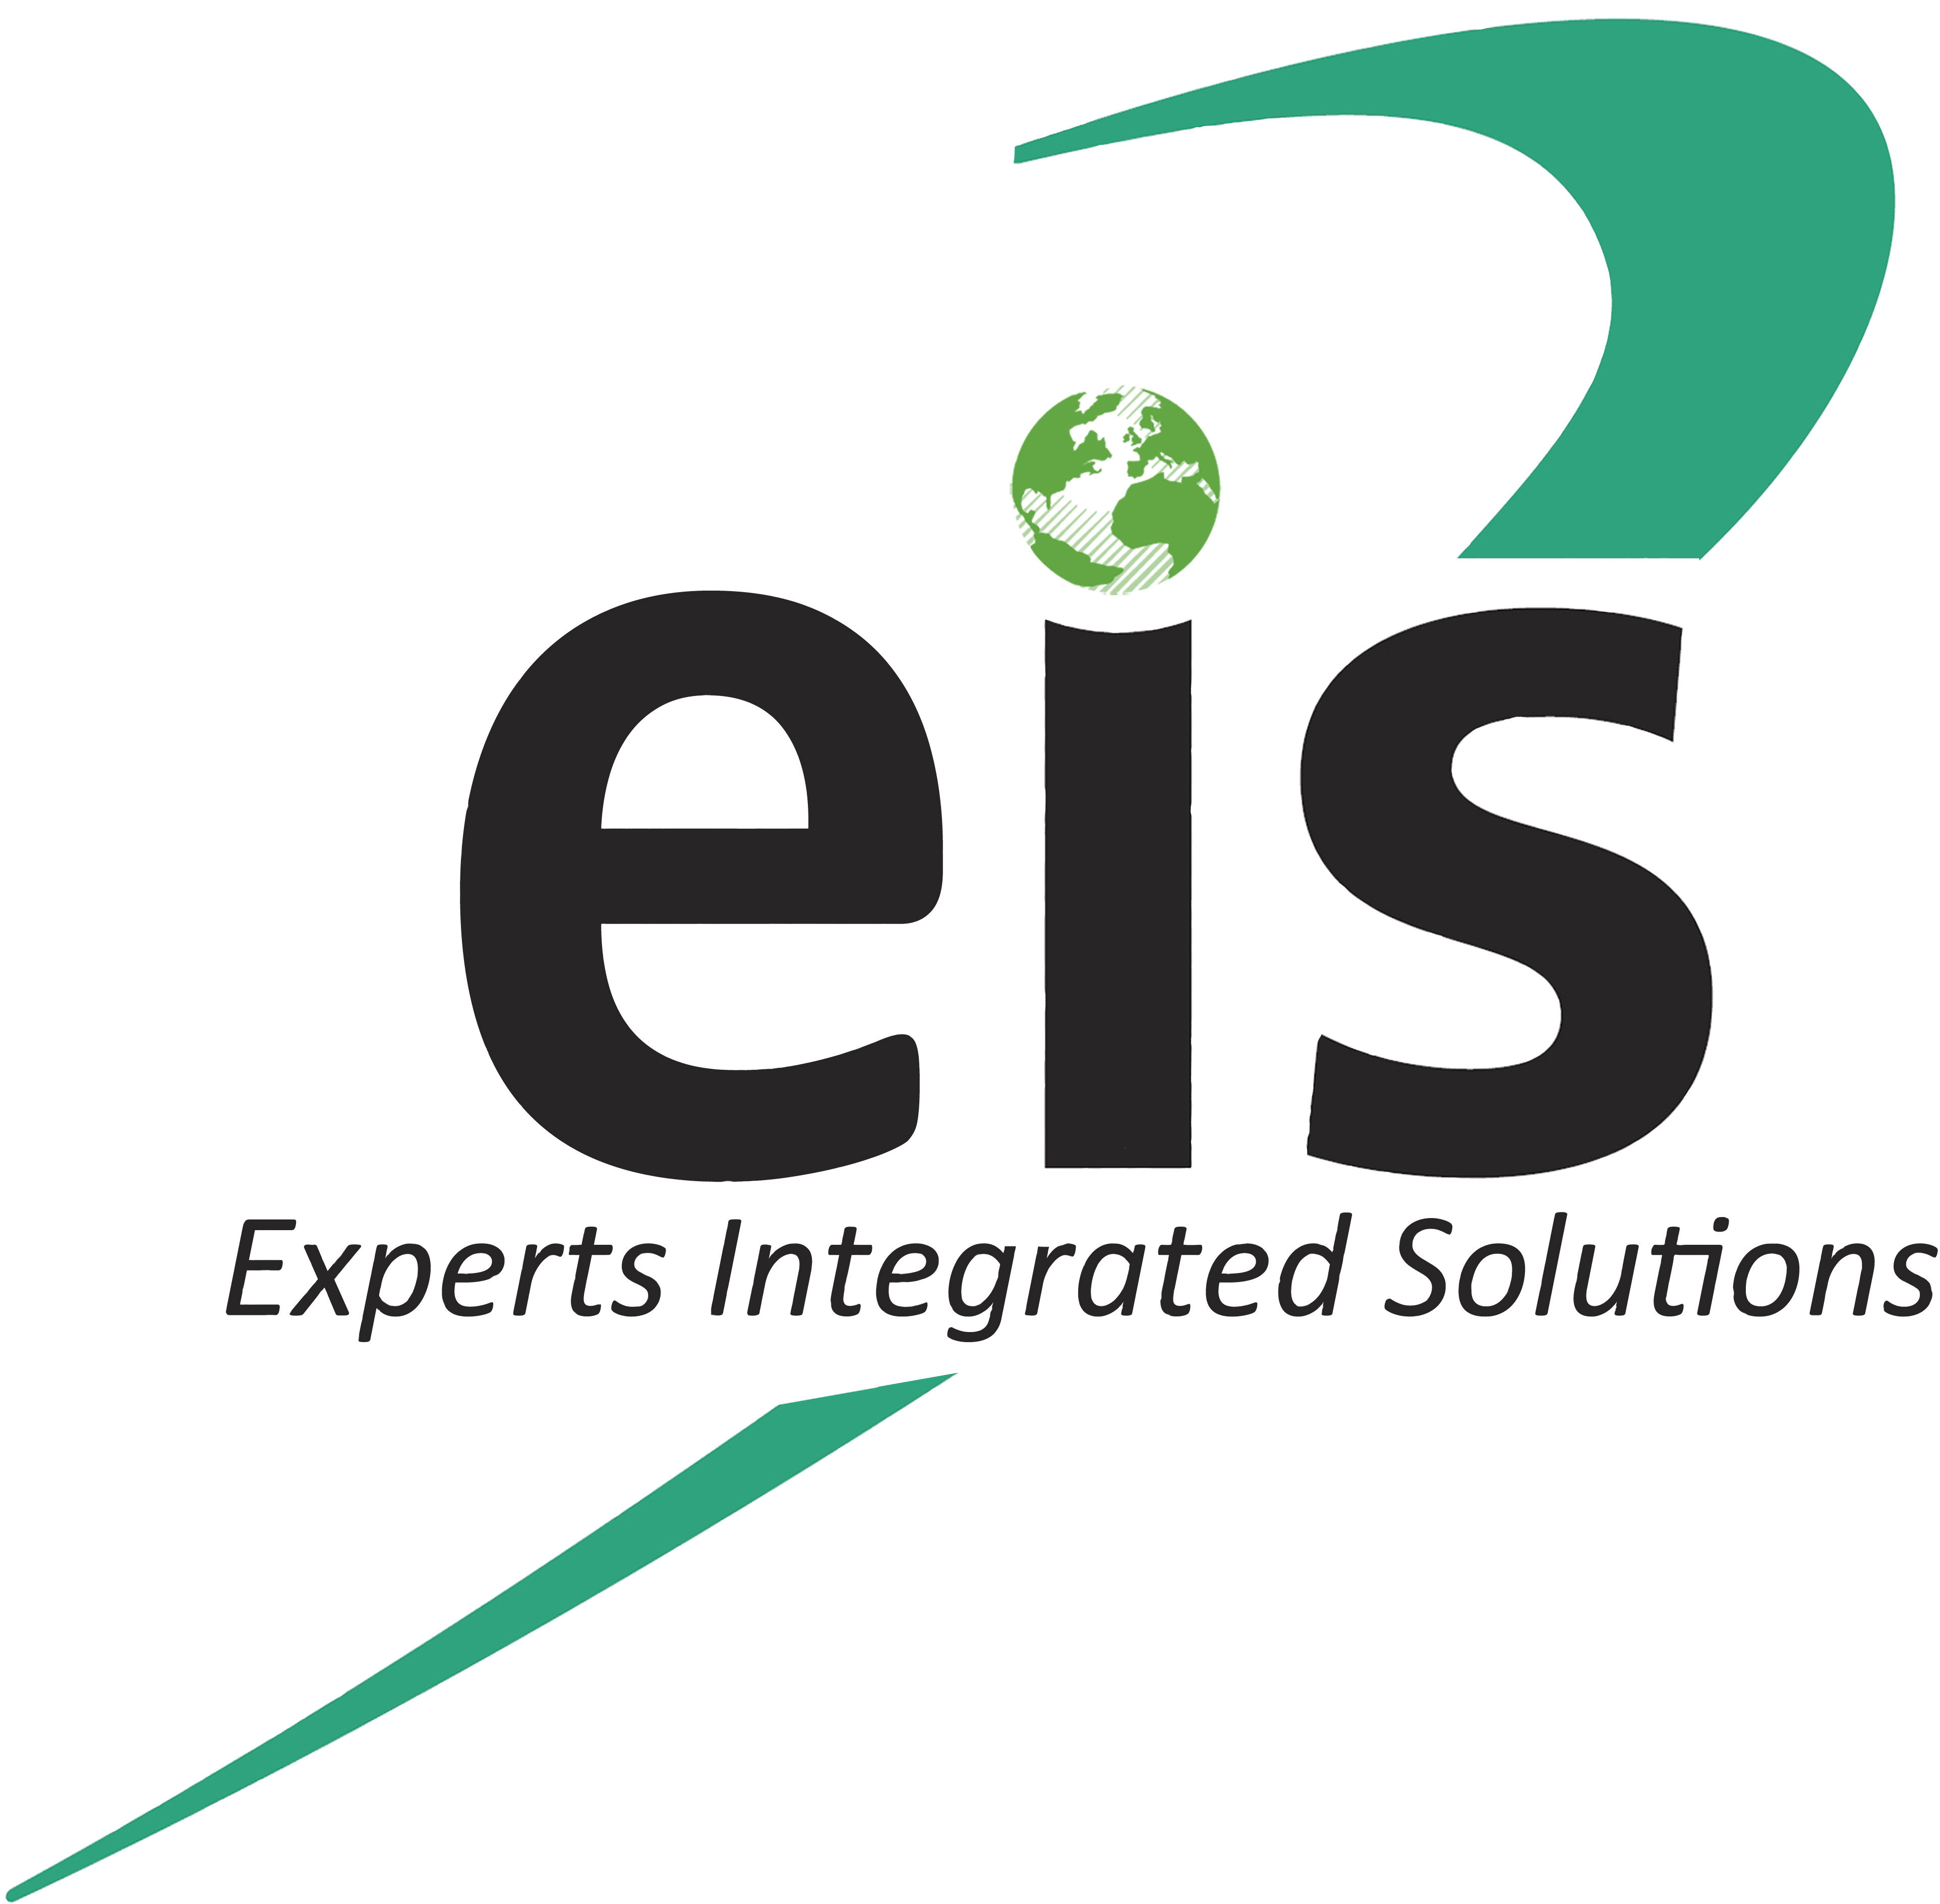 K&M has a Distributor with EIS in Egypt